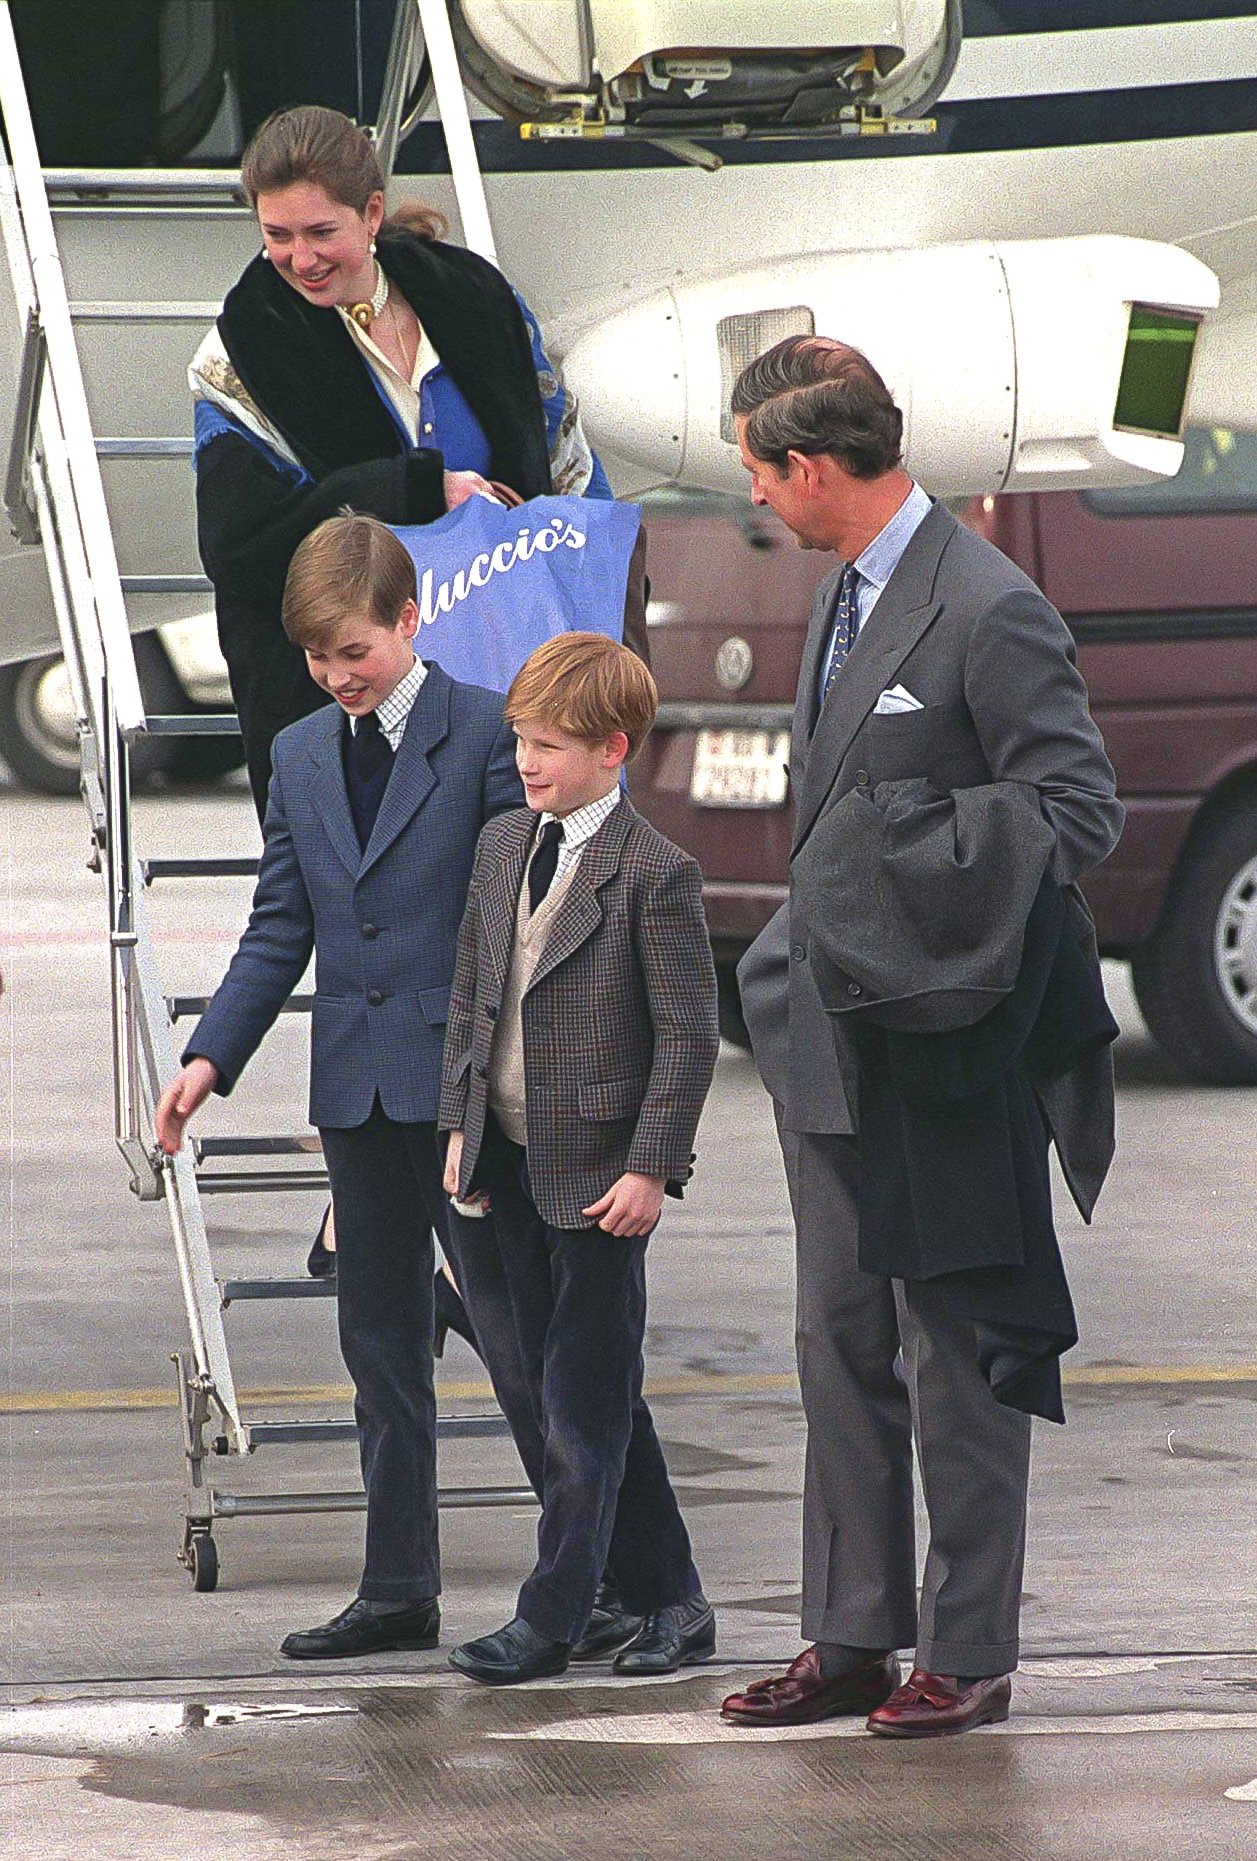 Prince Charles and Prince Harry standing with father Princes Charles and their Royal Nanny Tiggy Legge-Bourke at the Zurich Airport on February 17, 1994 | Photo: Getty Images